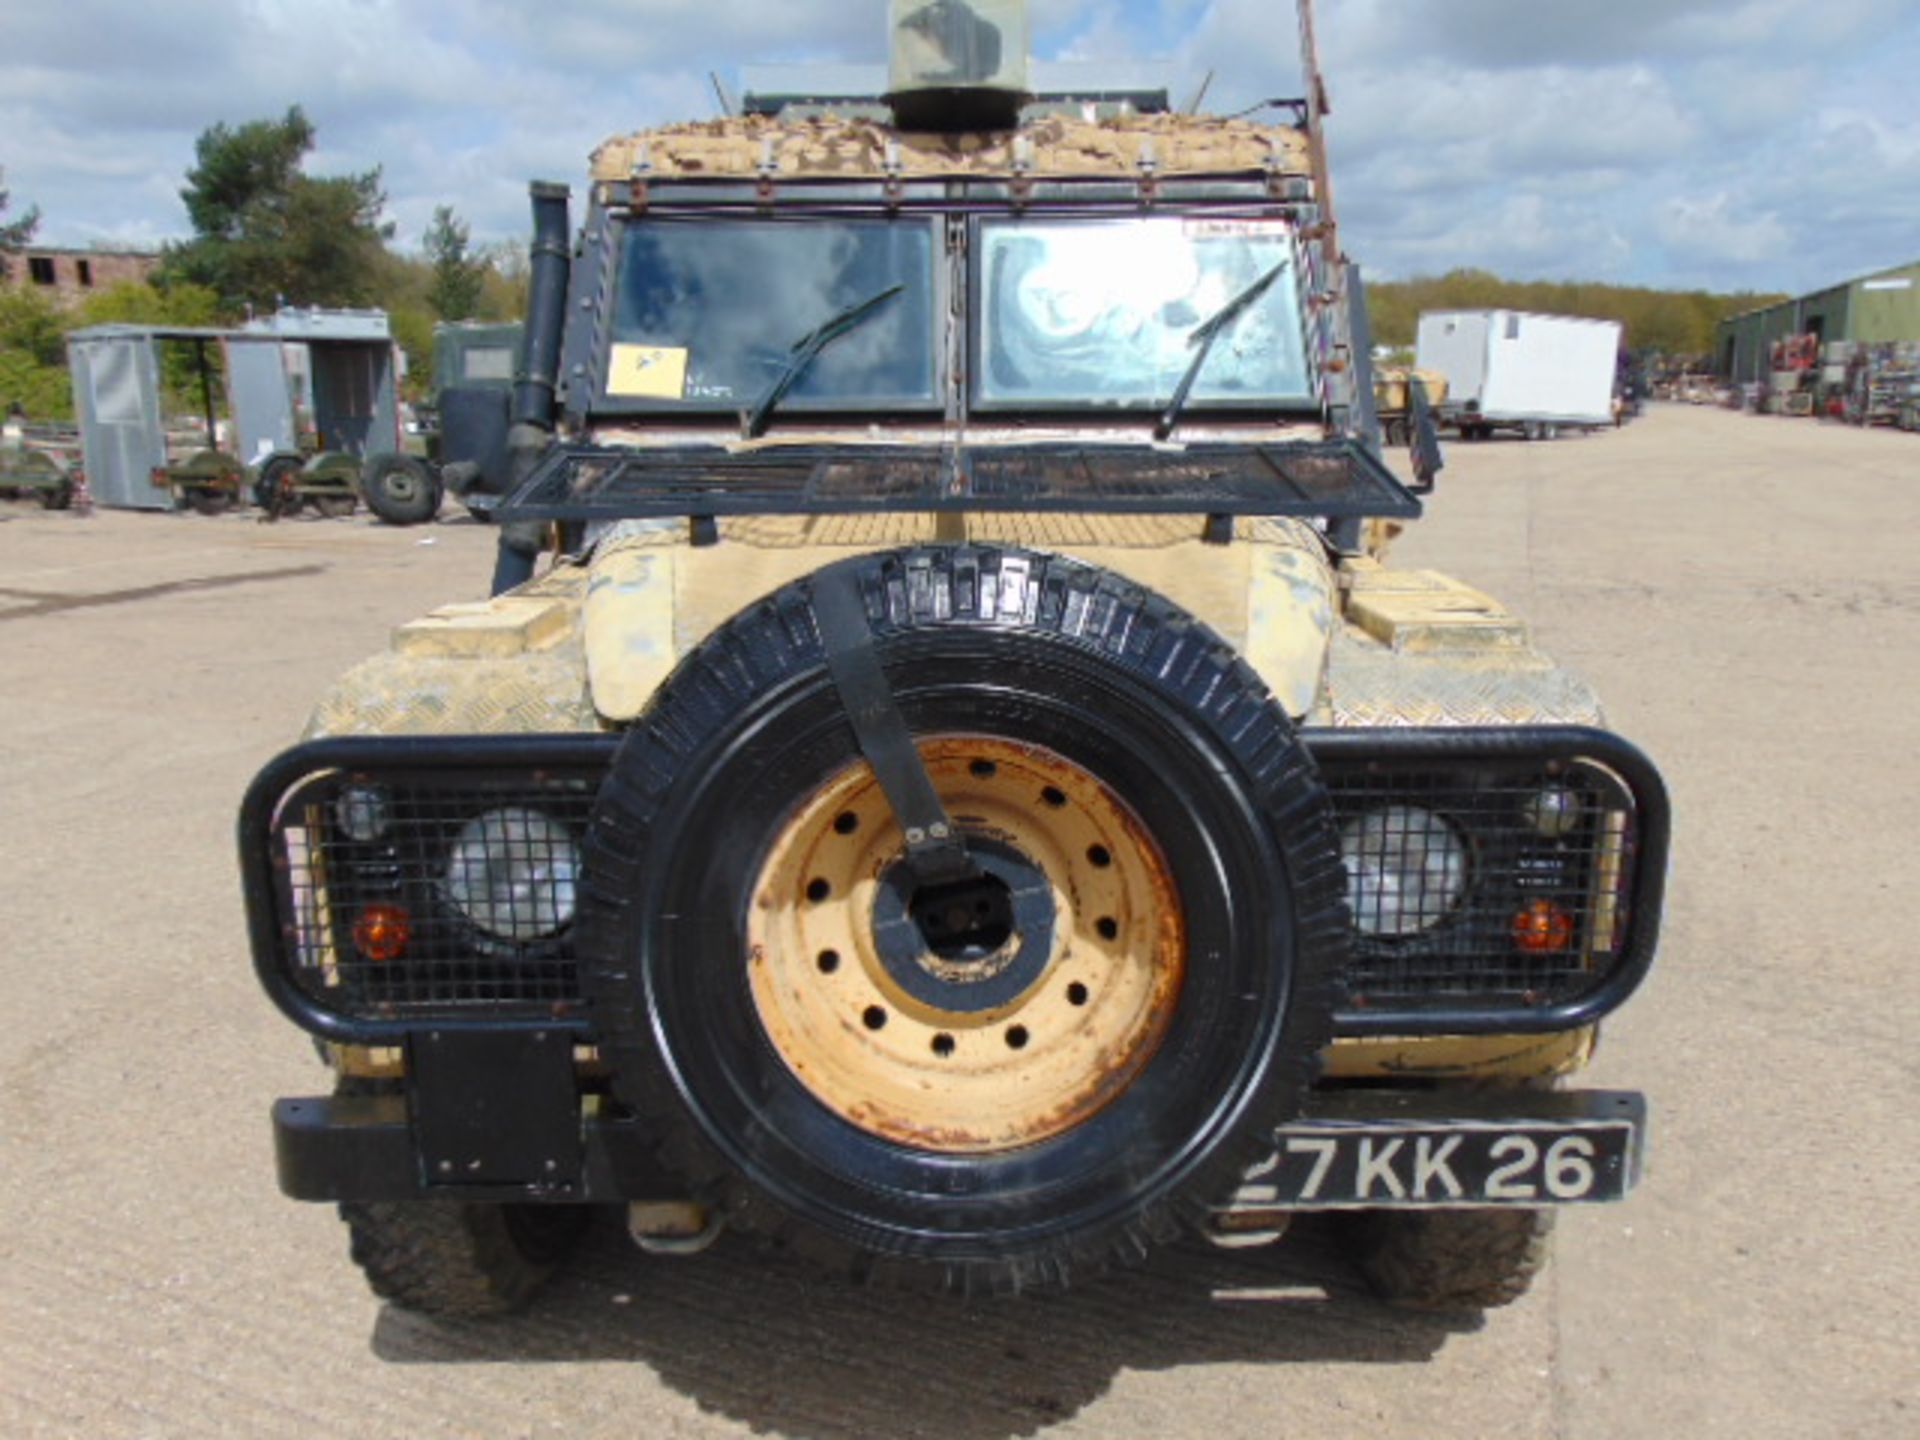 Land Rover Snatch 2A Armoured Defender 110 300TDi - Image 2 of 21